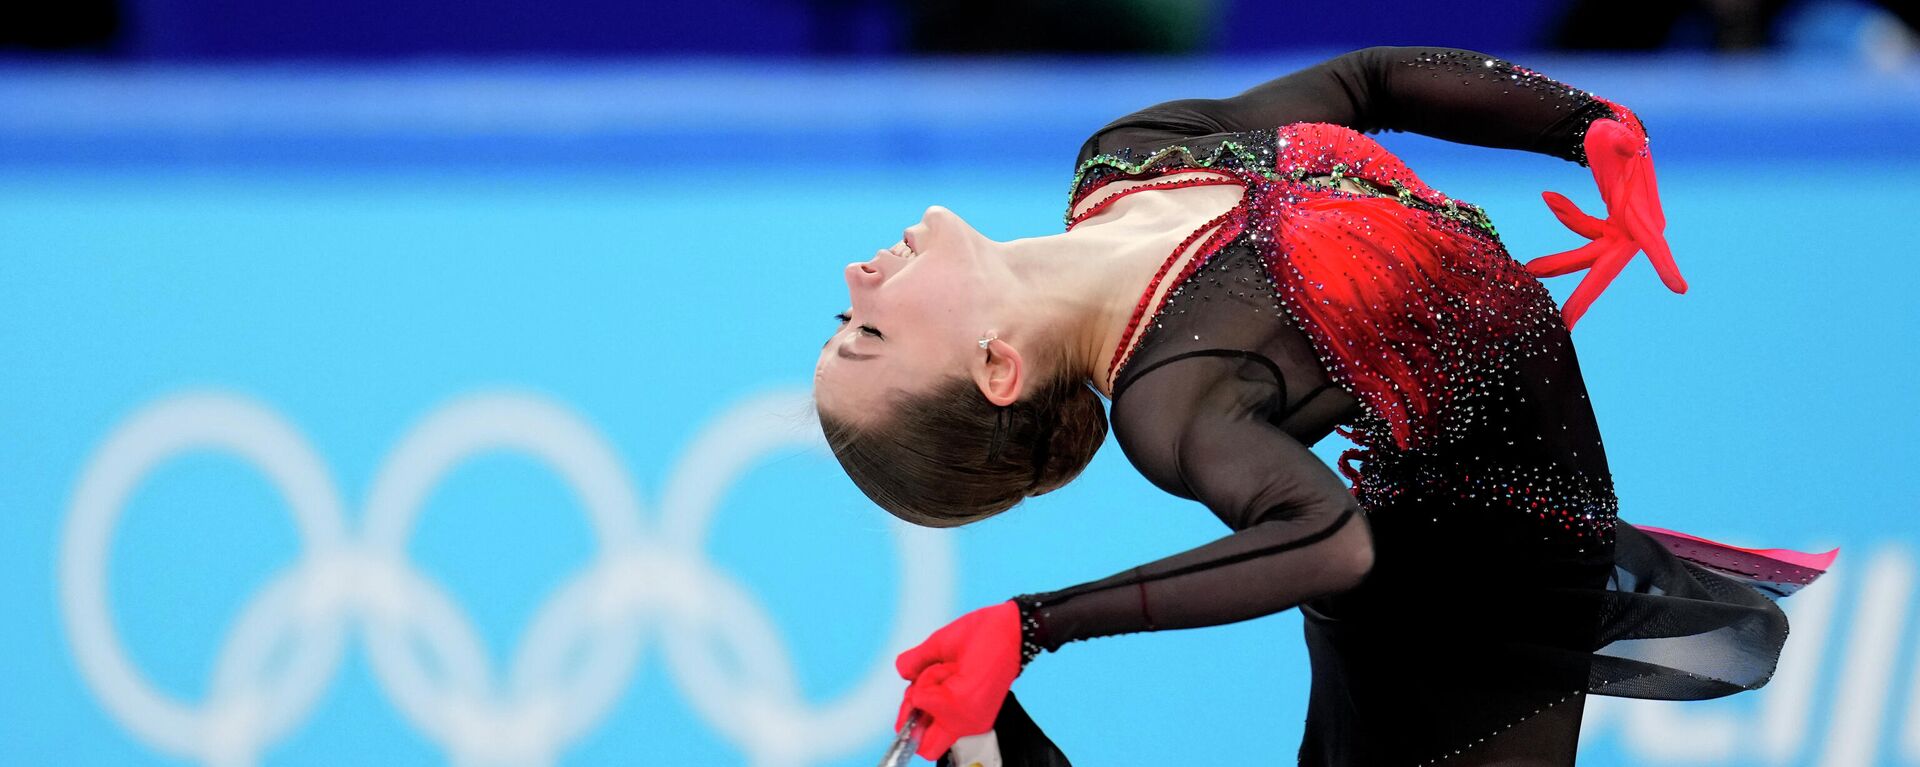 Kamila Valieva, of the Russian Olympic Committee, competes in the women's team free skate program during the figure skating competition at the 2022 Winter Olympics, Monday, Feb. 7, 2022, in Beijing. - Sputnik International, 1920, 15.02.2022